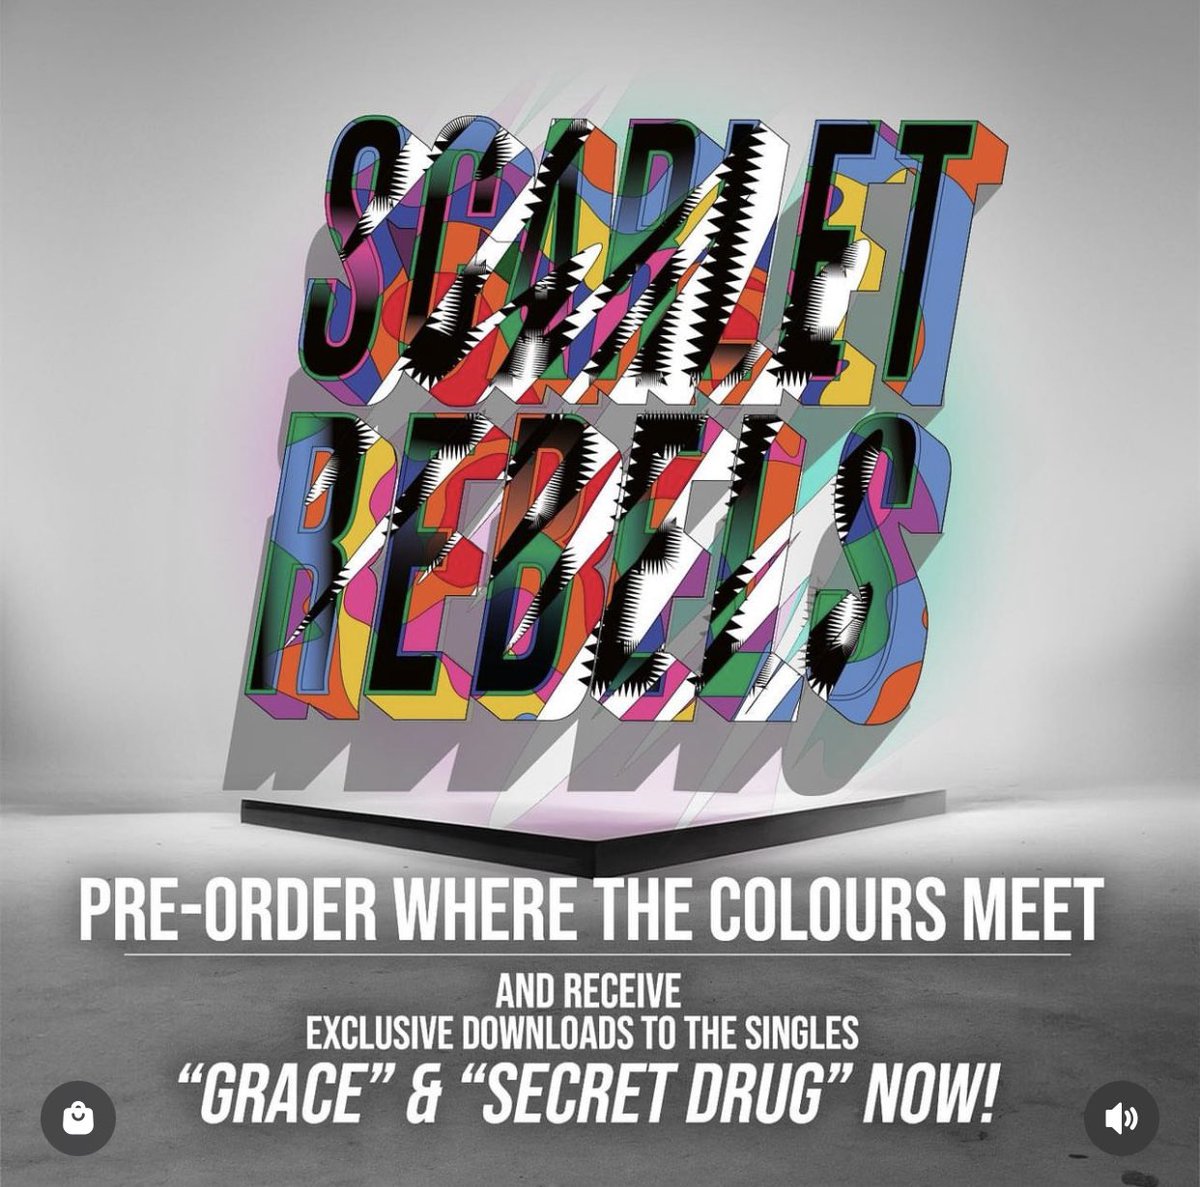 Scarlet Rebels - 2 songs from the new album now streaming- Secret Drug & Grace. Preorder limited wax colours inc signed LP earache.com/scarletrebels ⚫️⚪️🟢🔵